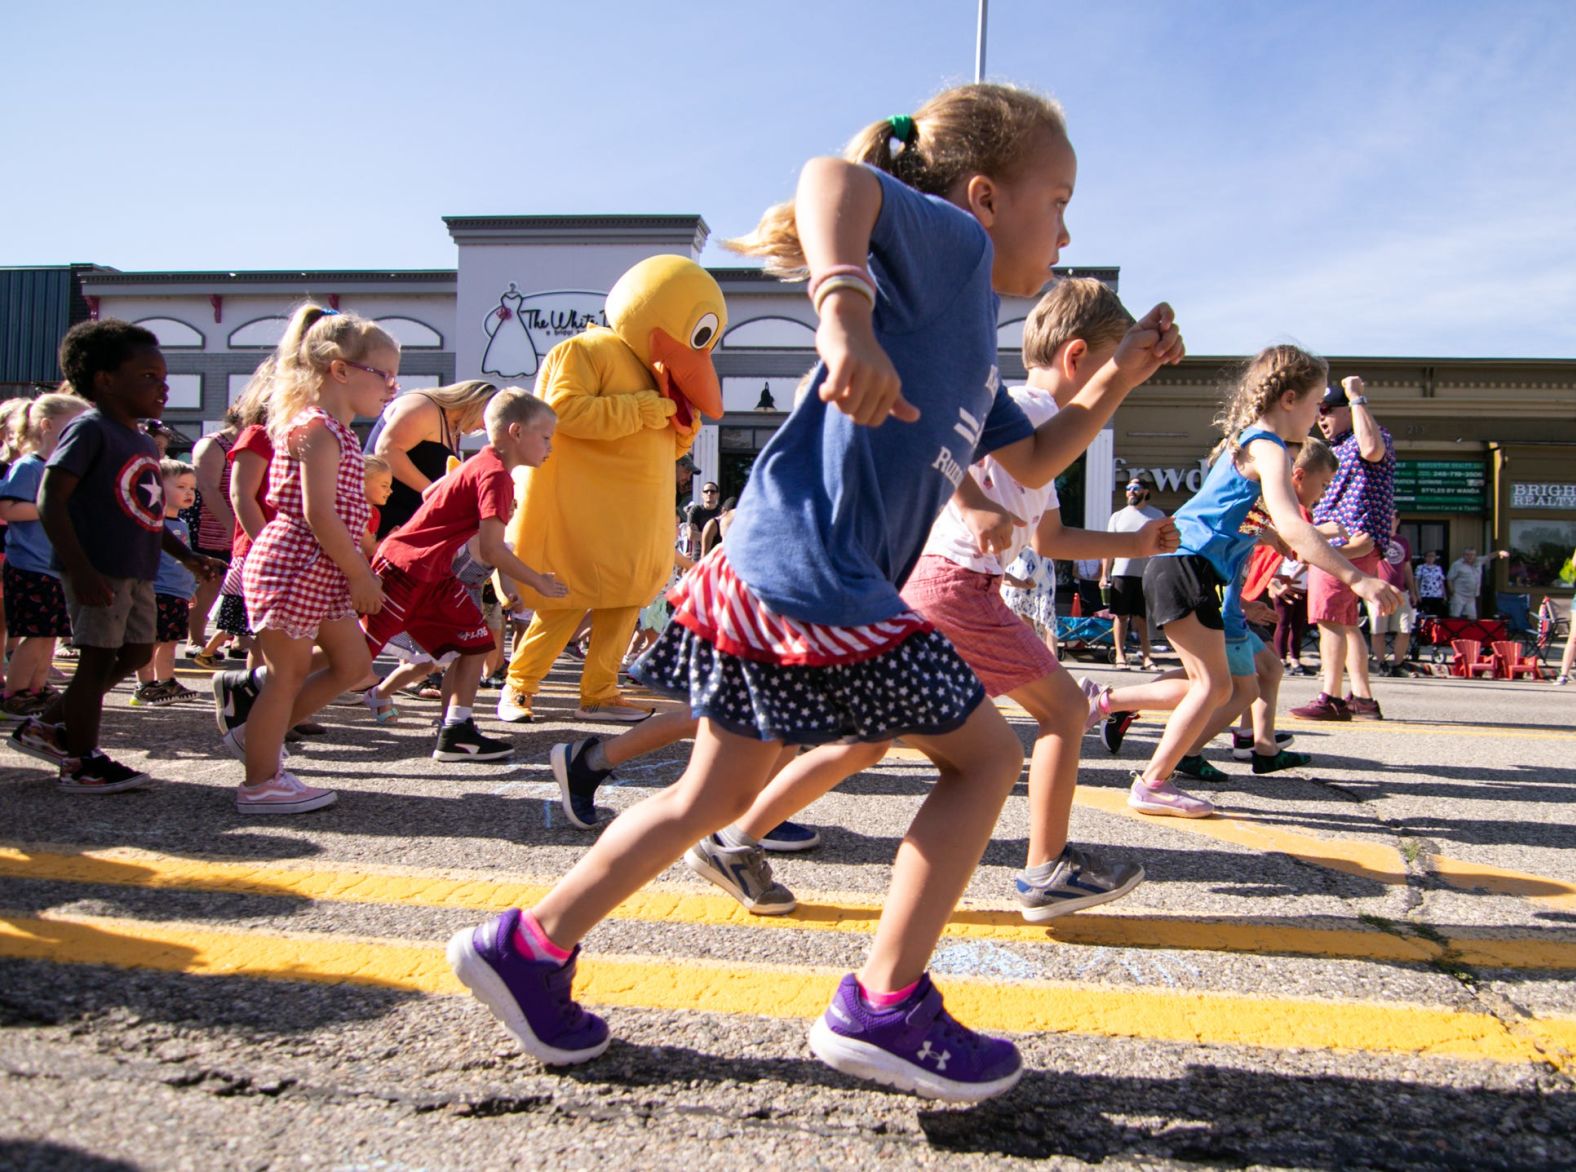 A younger wave of participants in the Duckling Dash during Fourth of July celebrations in Livingston, Michigan, Monday.